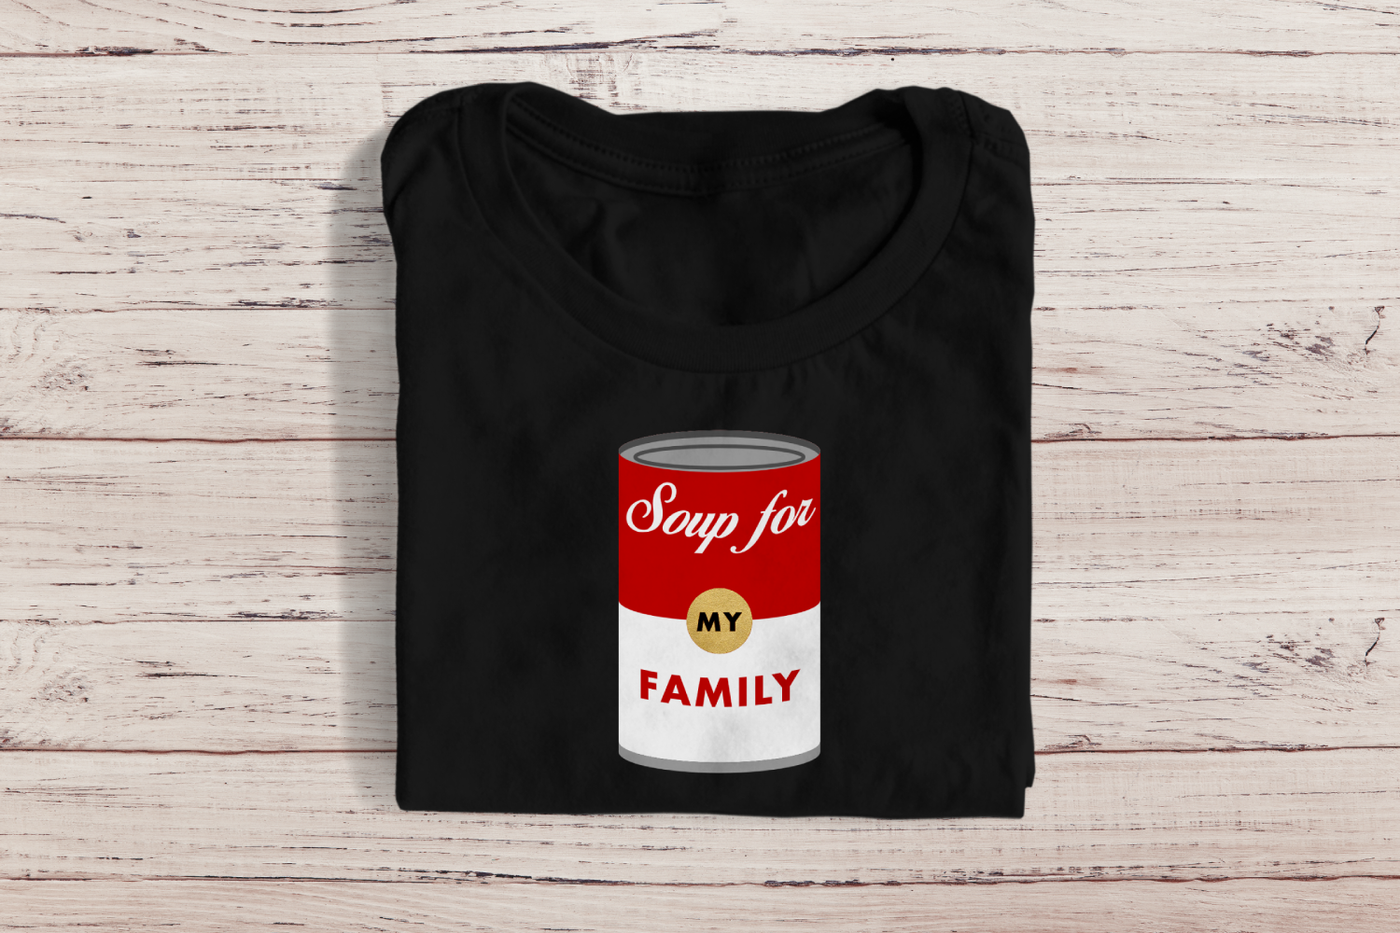 Soup can design that says "Soup for my family"